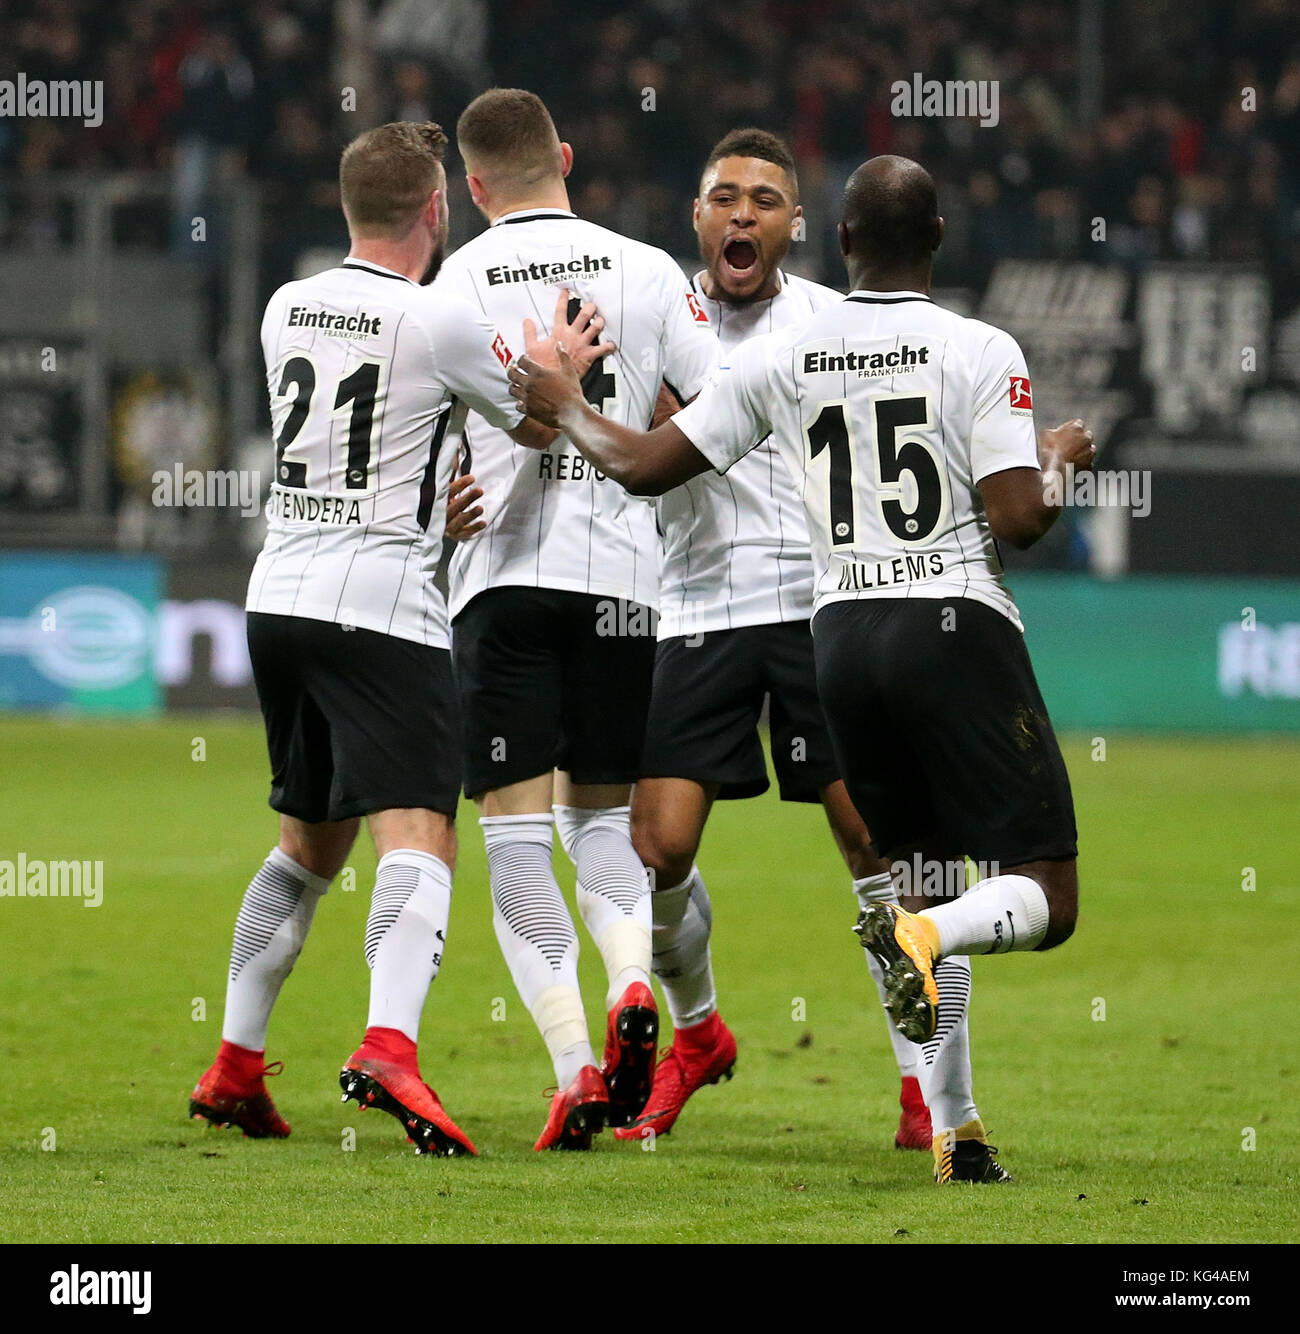 Frankfurt's Ante Rebic (C) celebrates his 1-0 goal with his team mates Marc Stendera (Frankfurt), Jetro Willems (Frankfurt), Simon Falette (Frankfurt) during the German Bundesliga soccer match between Eintracht Frankfurt and Werder Bremen in Frankfurt/M., Germany, 03 November 2017. (EMBARGO CONDITIONS - ATTENTION: Due to the accreditation guidelines, the DFL only permits the publication and utilisation of up to 15 pictures per match on the internet and in online media during the match.) Photo: Hasan Bratic/dpa Stock Photo